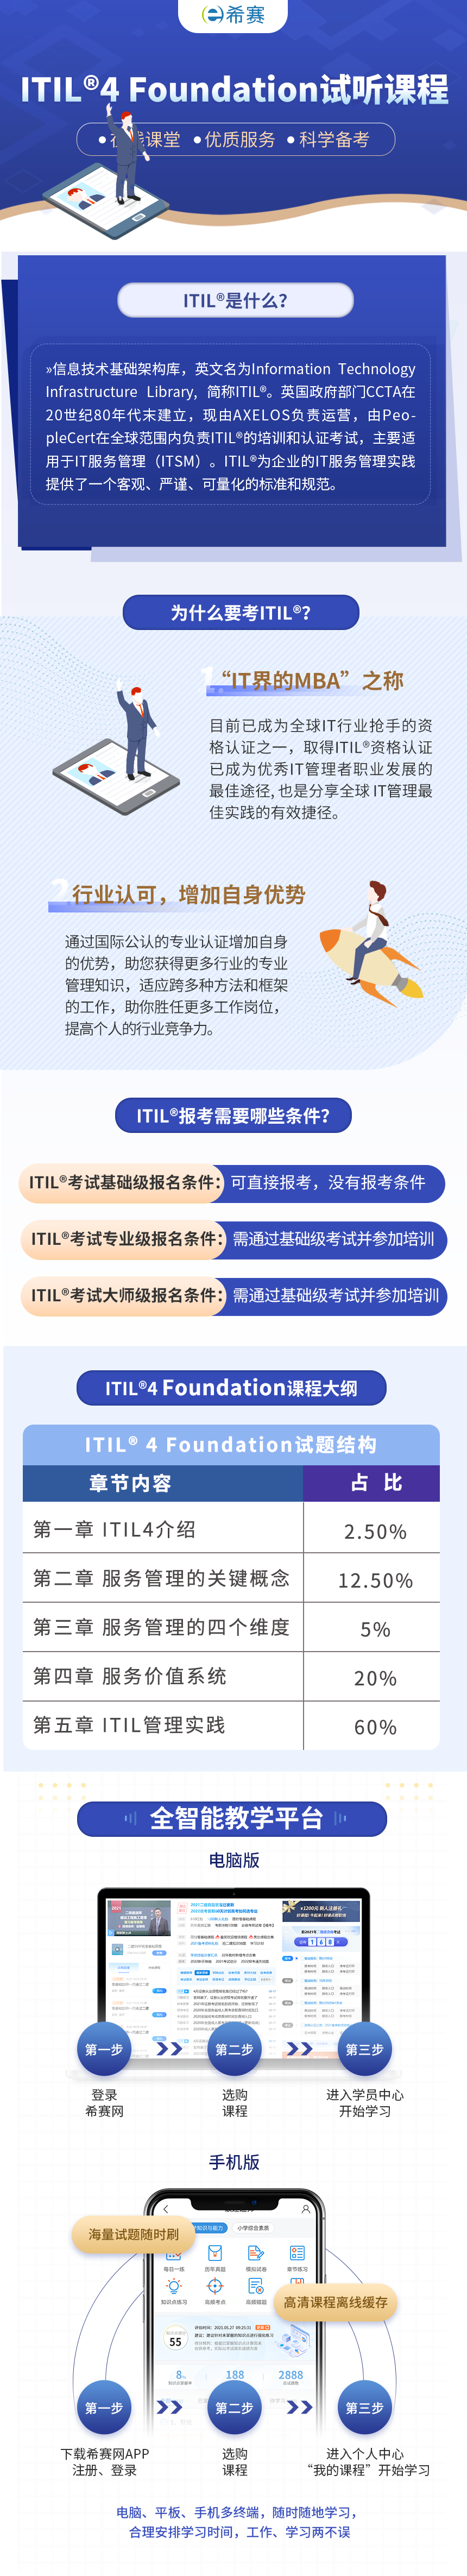 ITIL<sup>®</sup>试听课程(1).png